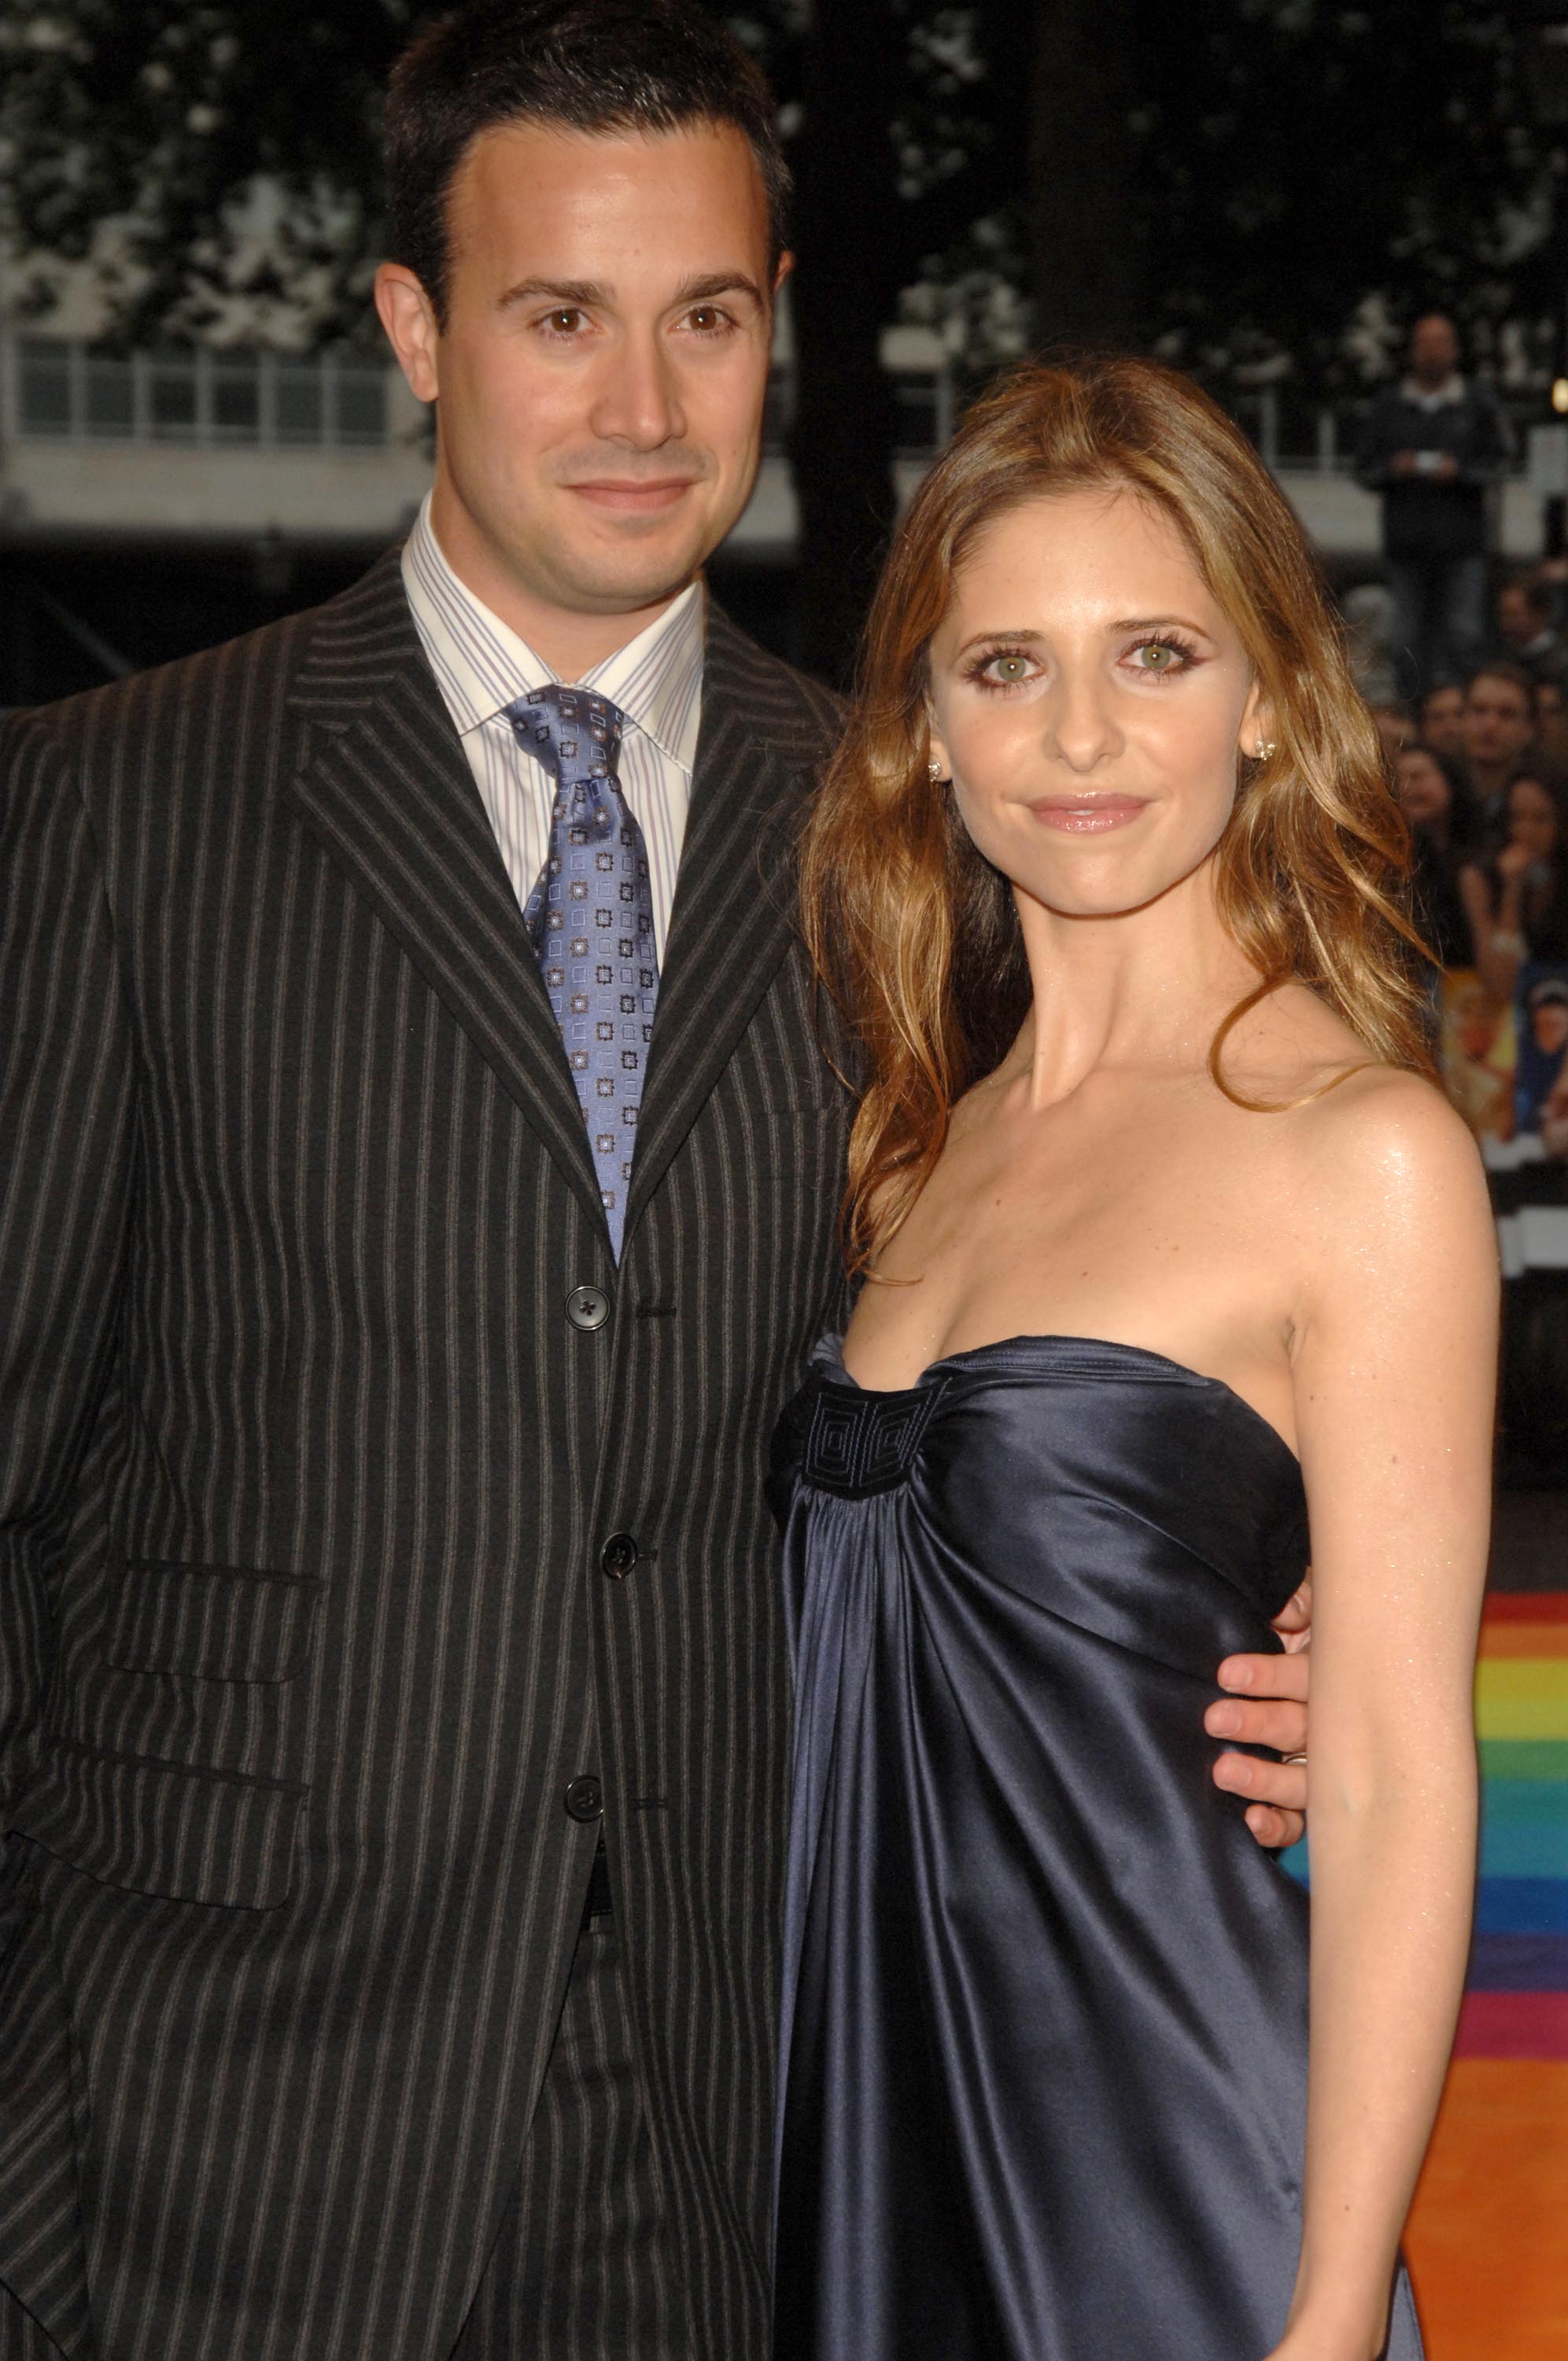 <p>Yes, <a href="https://www.wonderwall.com/celebrity/profiles/overview/sarah-michelle-gellar-396.article">Sarah Michelle Gellar</a> and Freddie Prinze Jr. met while making the campy 1997 teen horror classic "I Know What You Did Last Summer." But no, that's not when they started dating. That came three years later. "We had made plans for dinner [at a sushi restaurant] with a mutual friend and the person canceled," SMG told People after their 2002 wedding. "We decided to have dinner anyway and never looked back."</p>